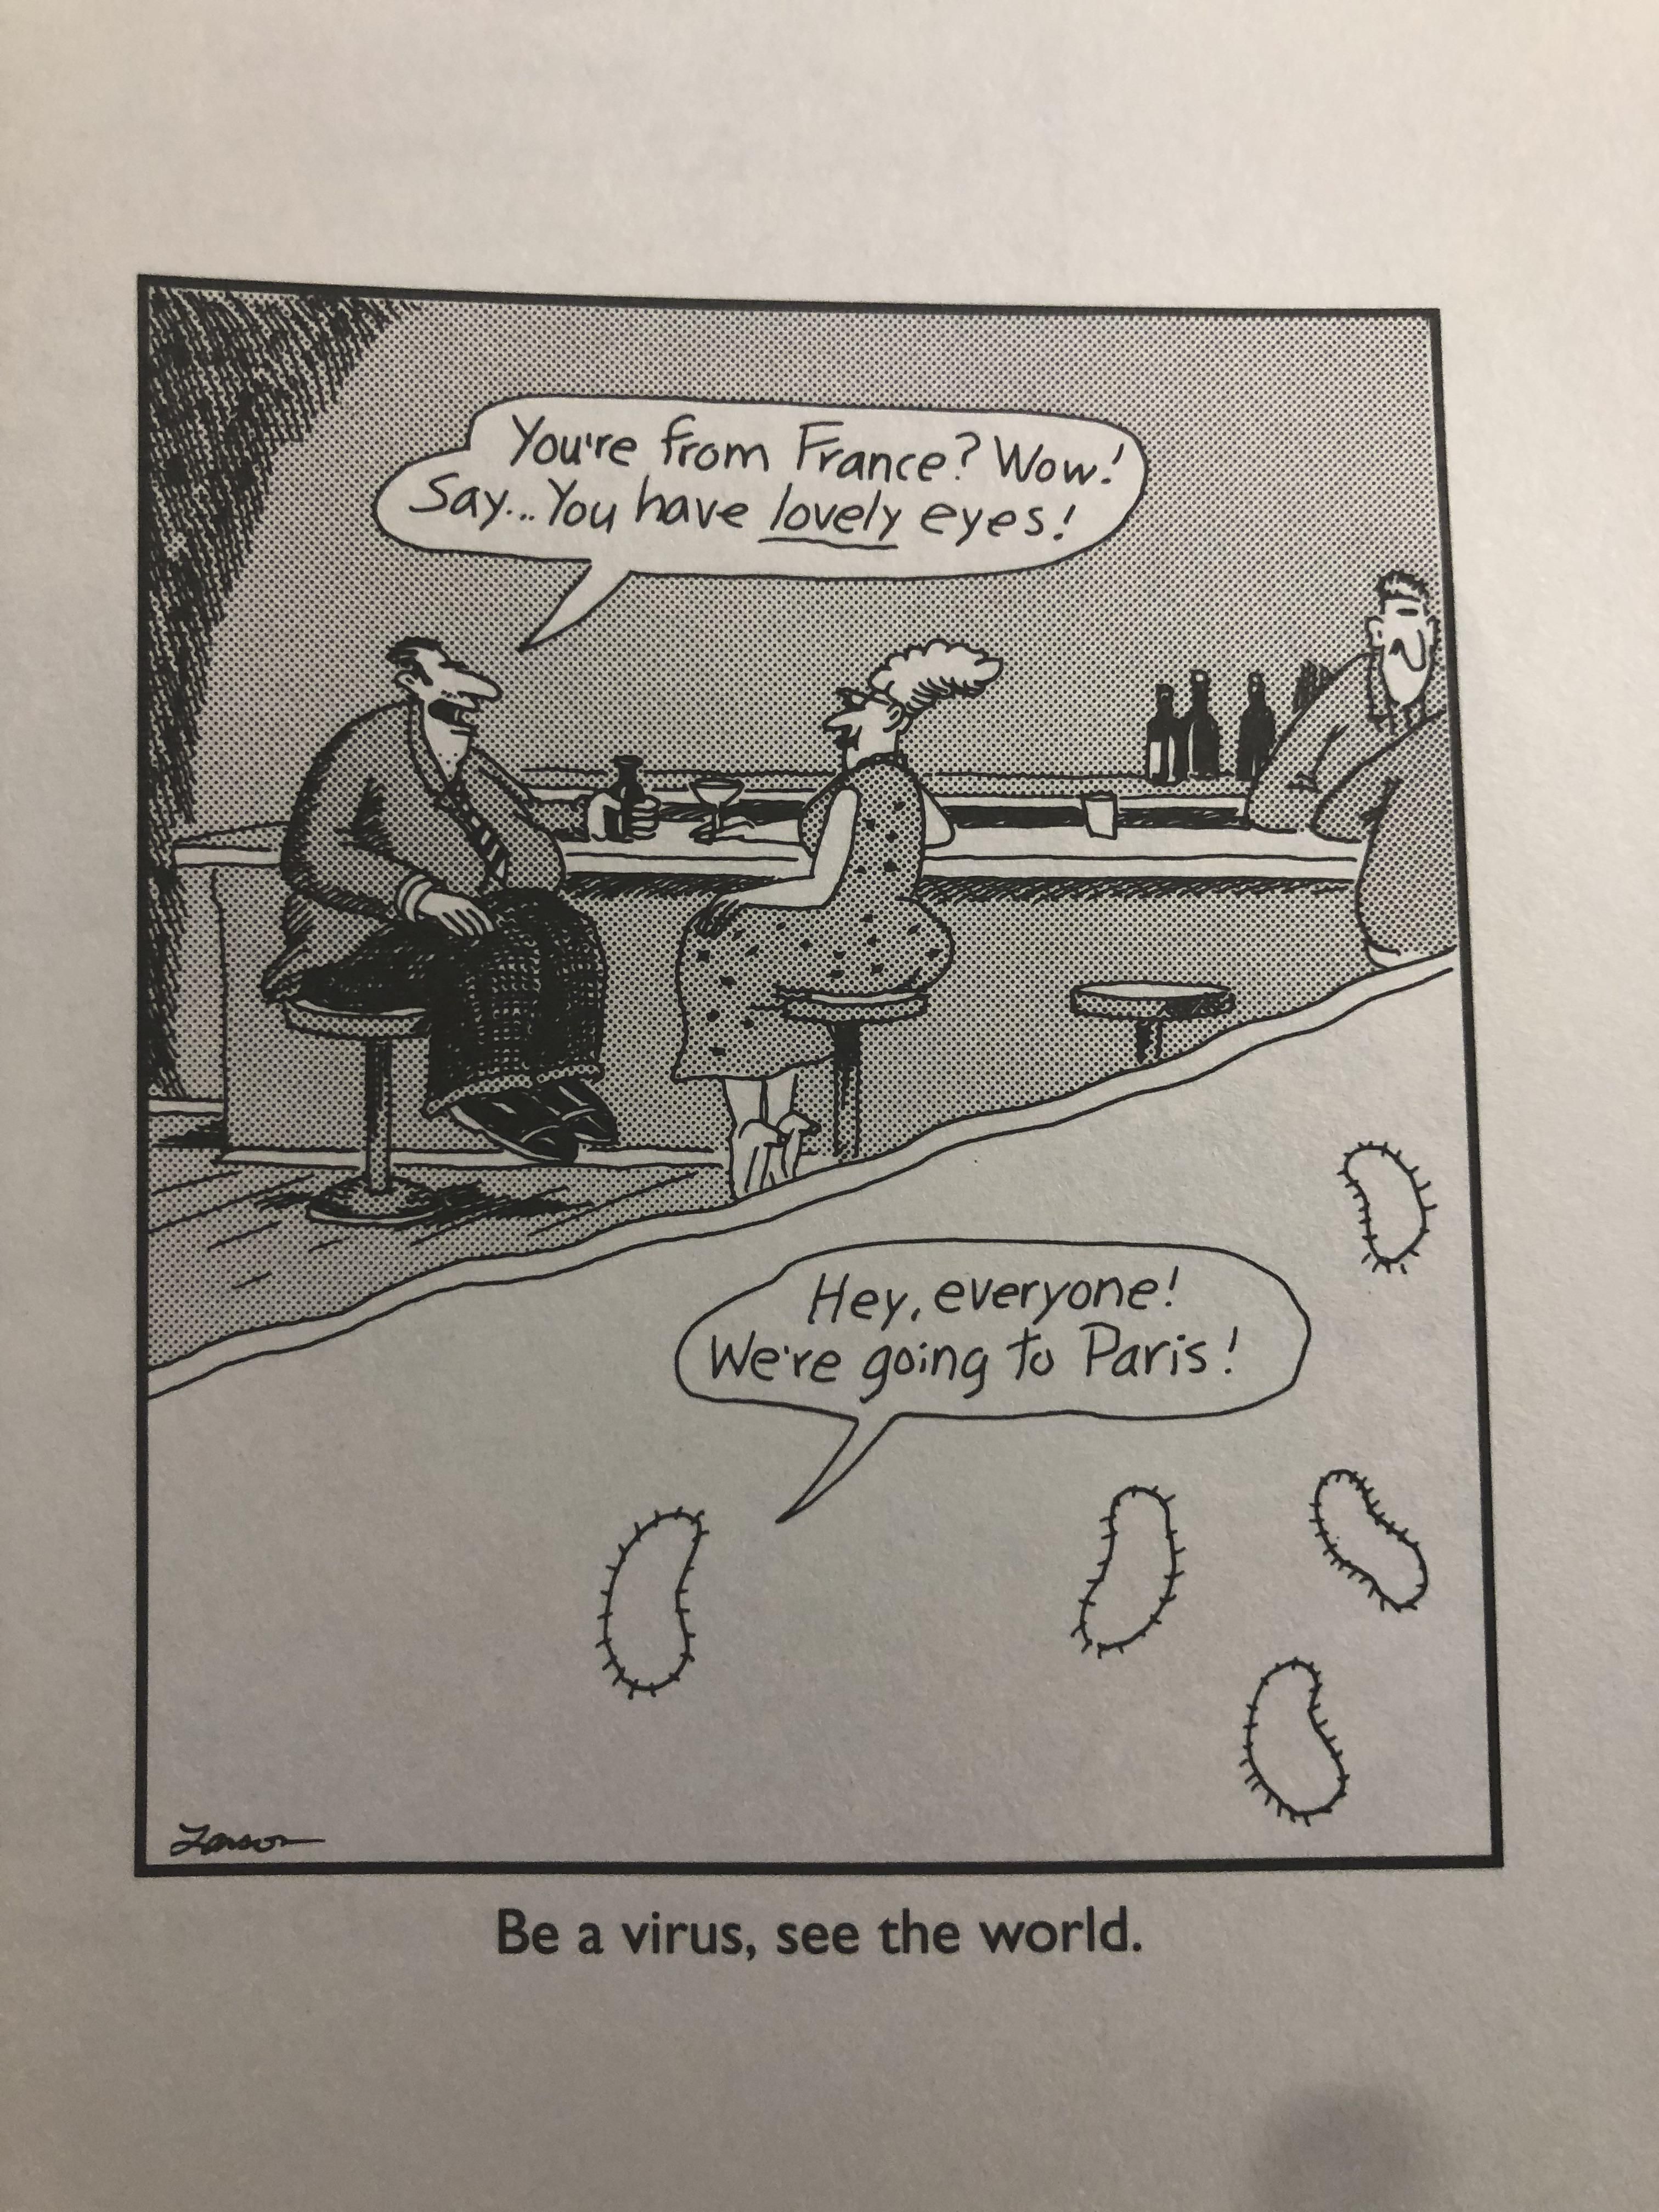 Gary Larson was way ahead on this one